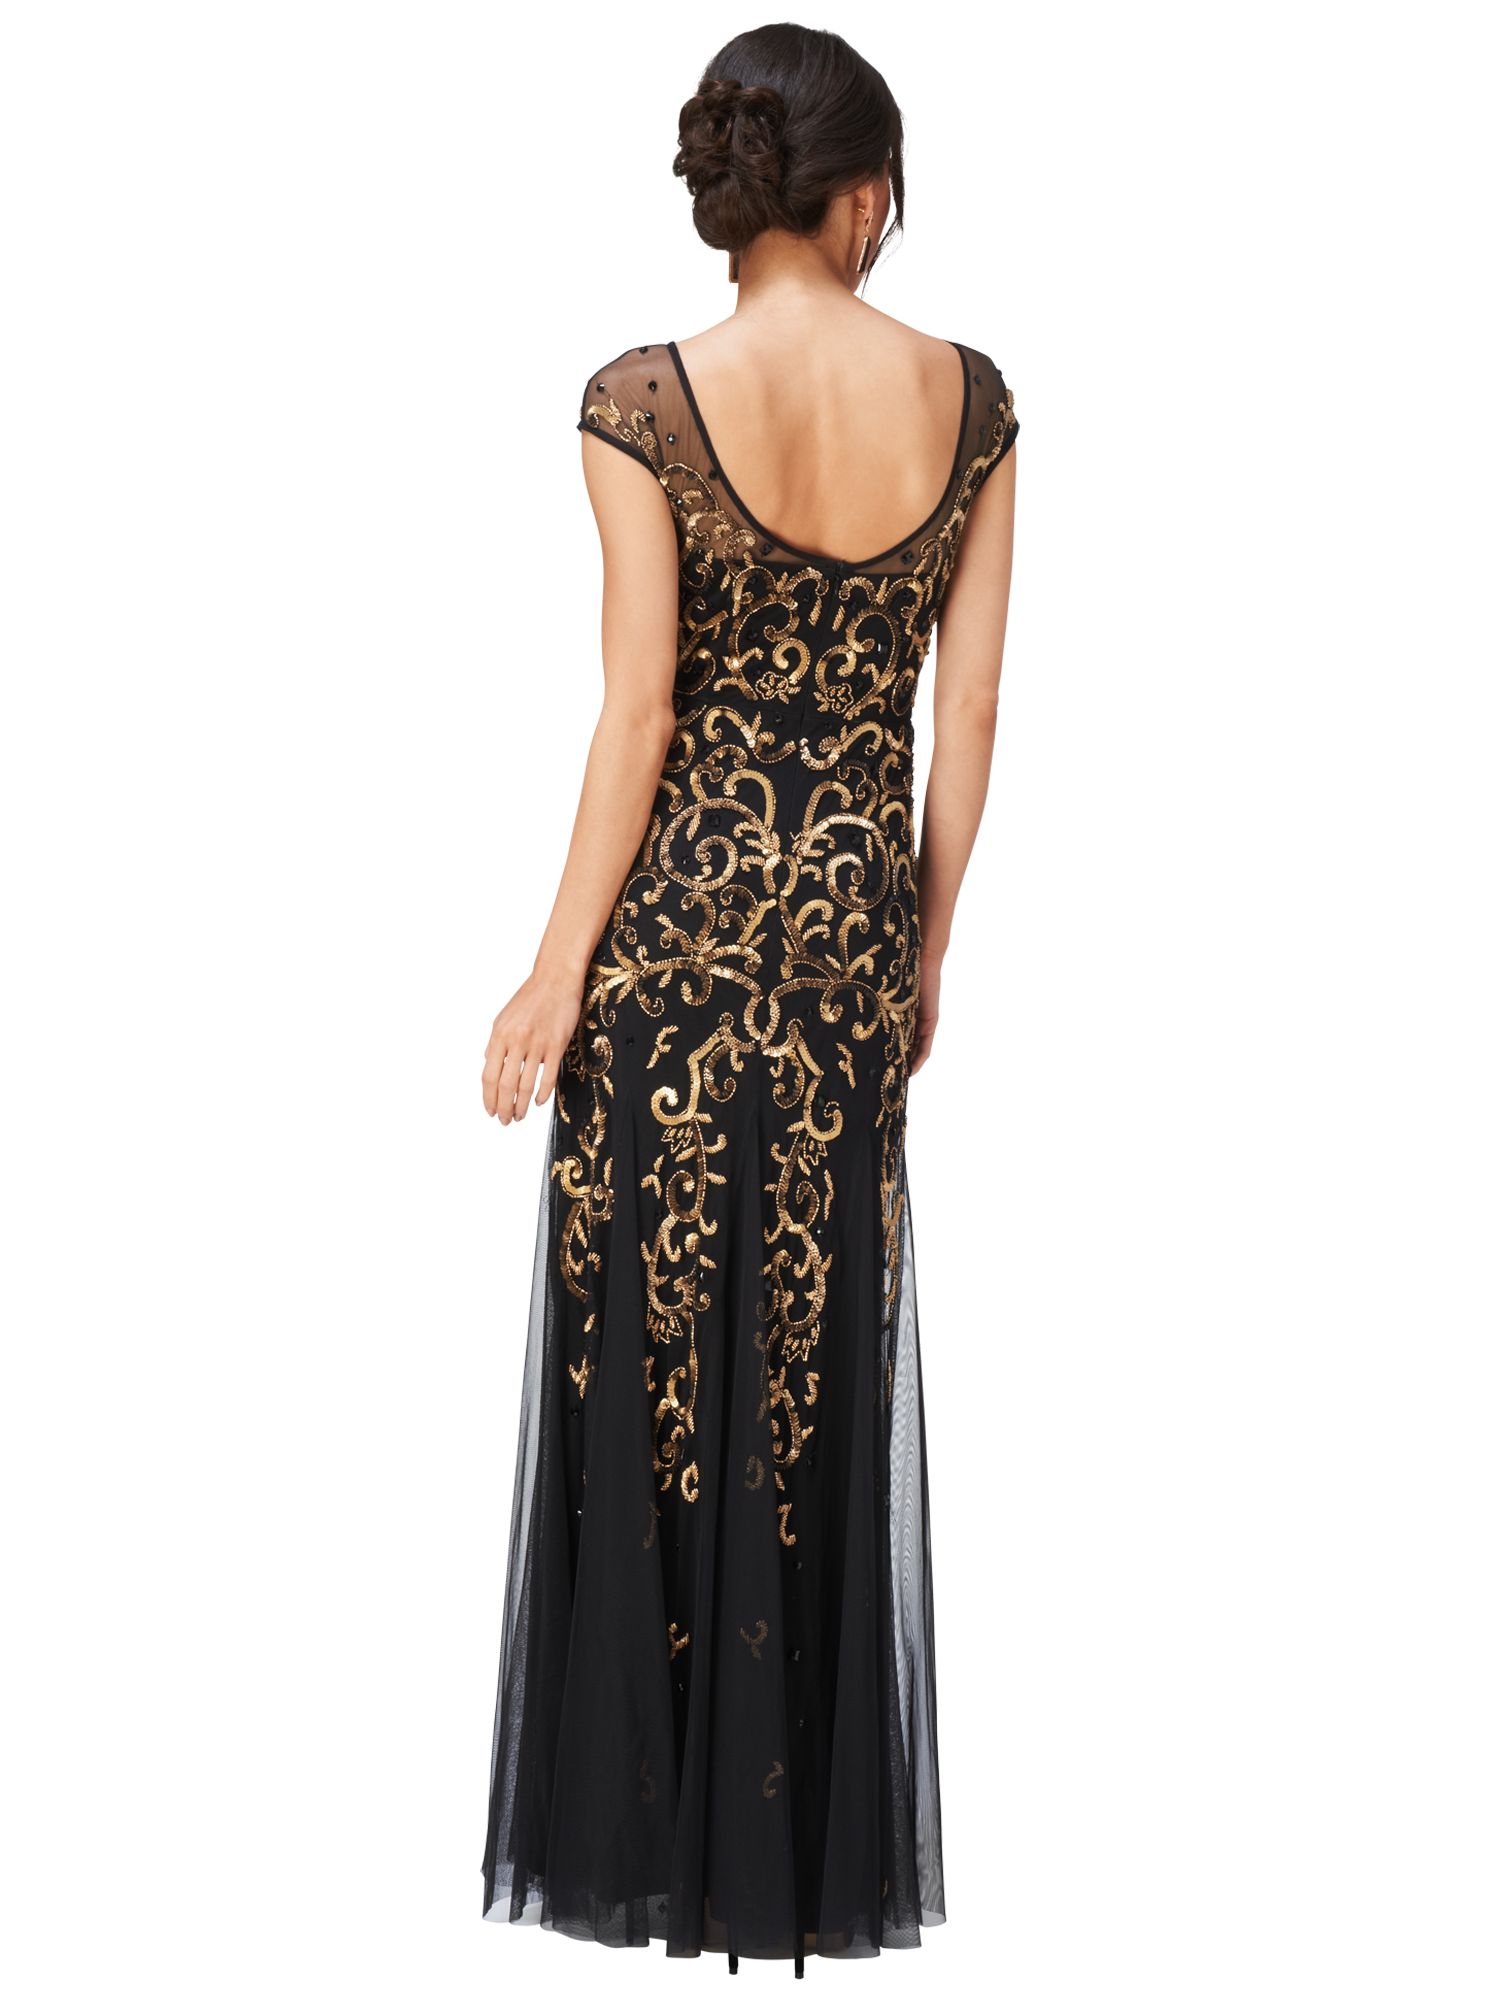 Phase Eight Collection 8 Nina Embellished Maxi Dress, Black/Gold at ...